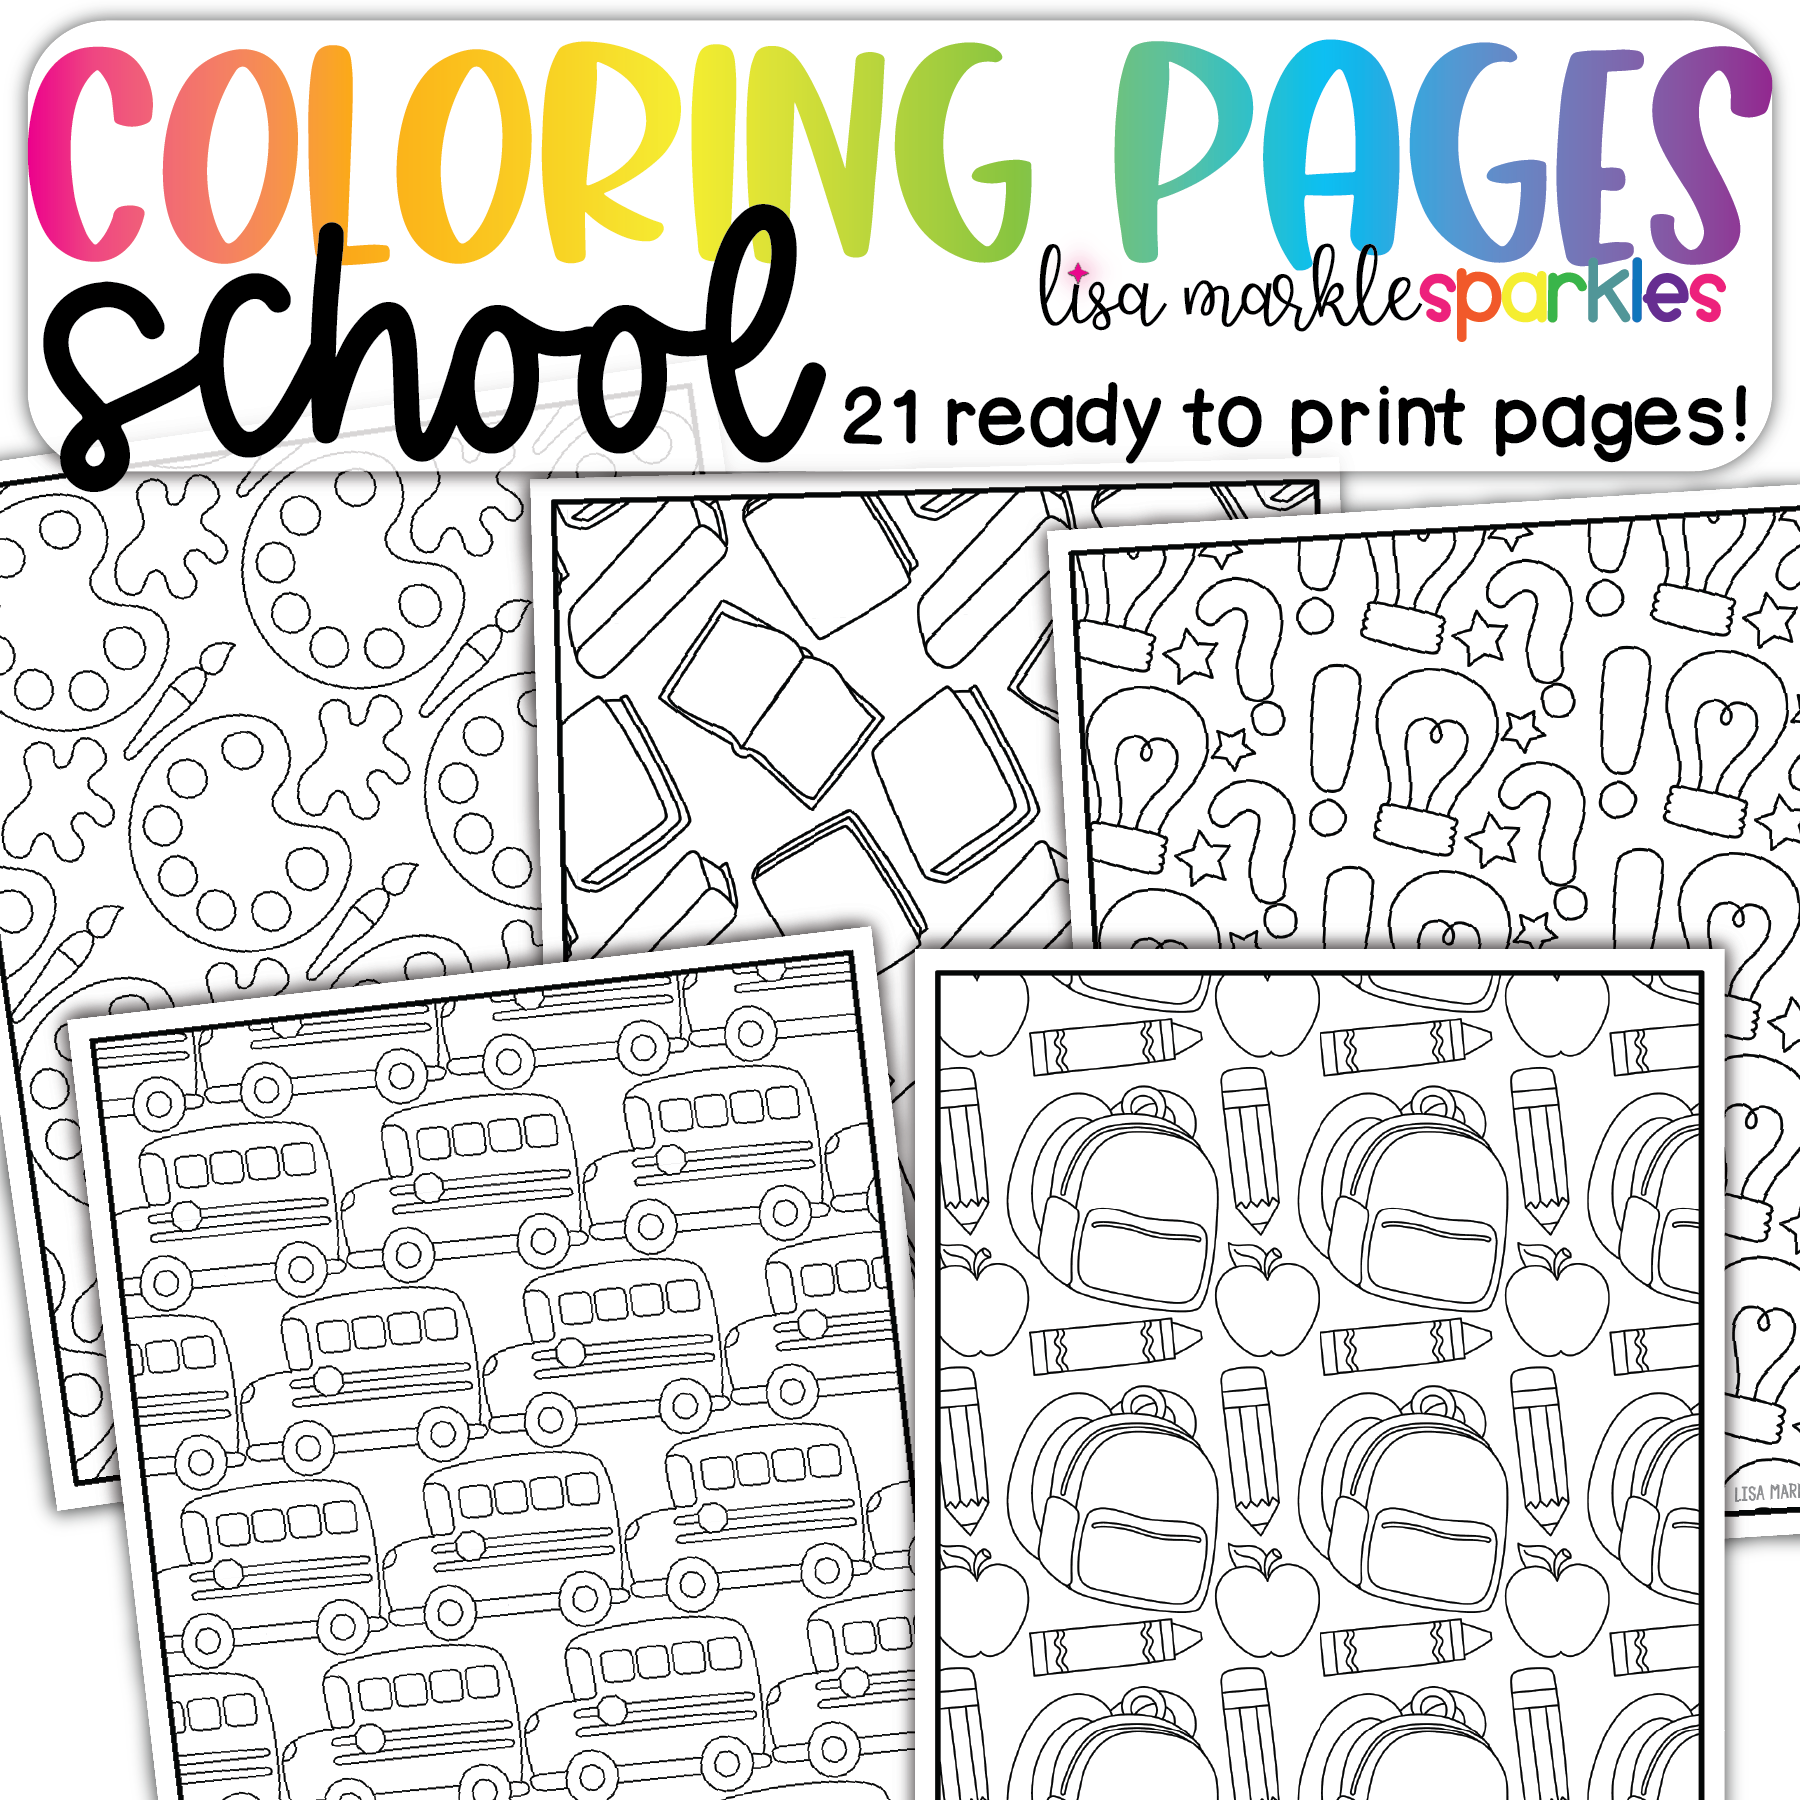 First day of back to school coloring pages sheets printable pdf for kids and adults